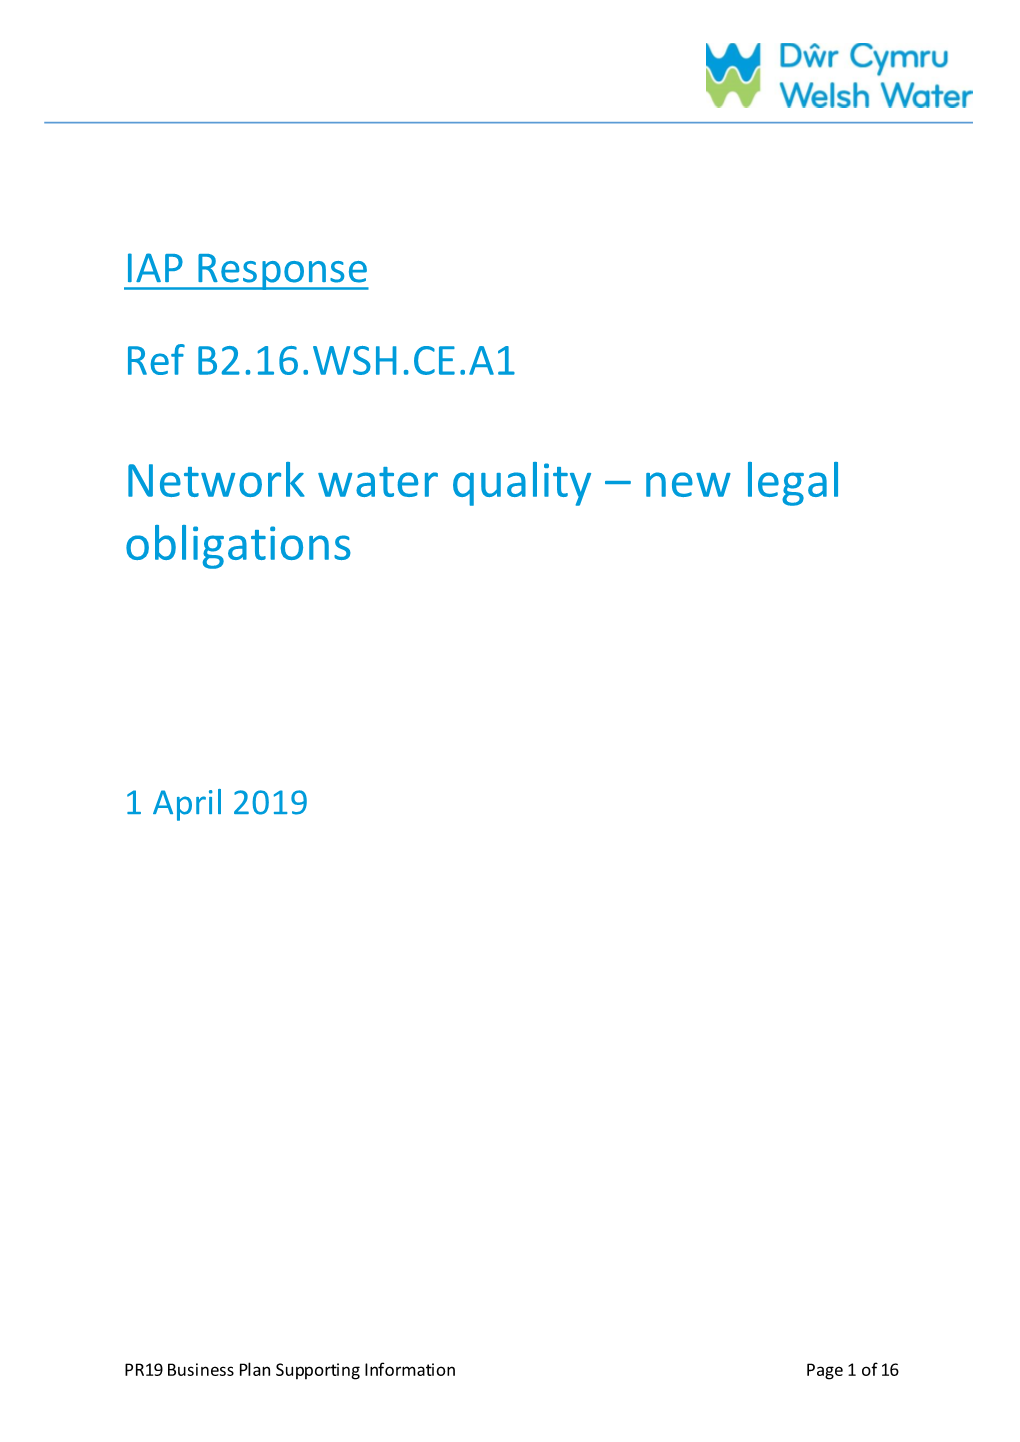 Network Water Quality – New Legal Obligations